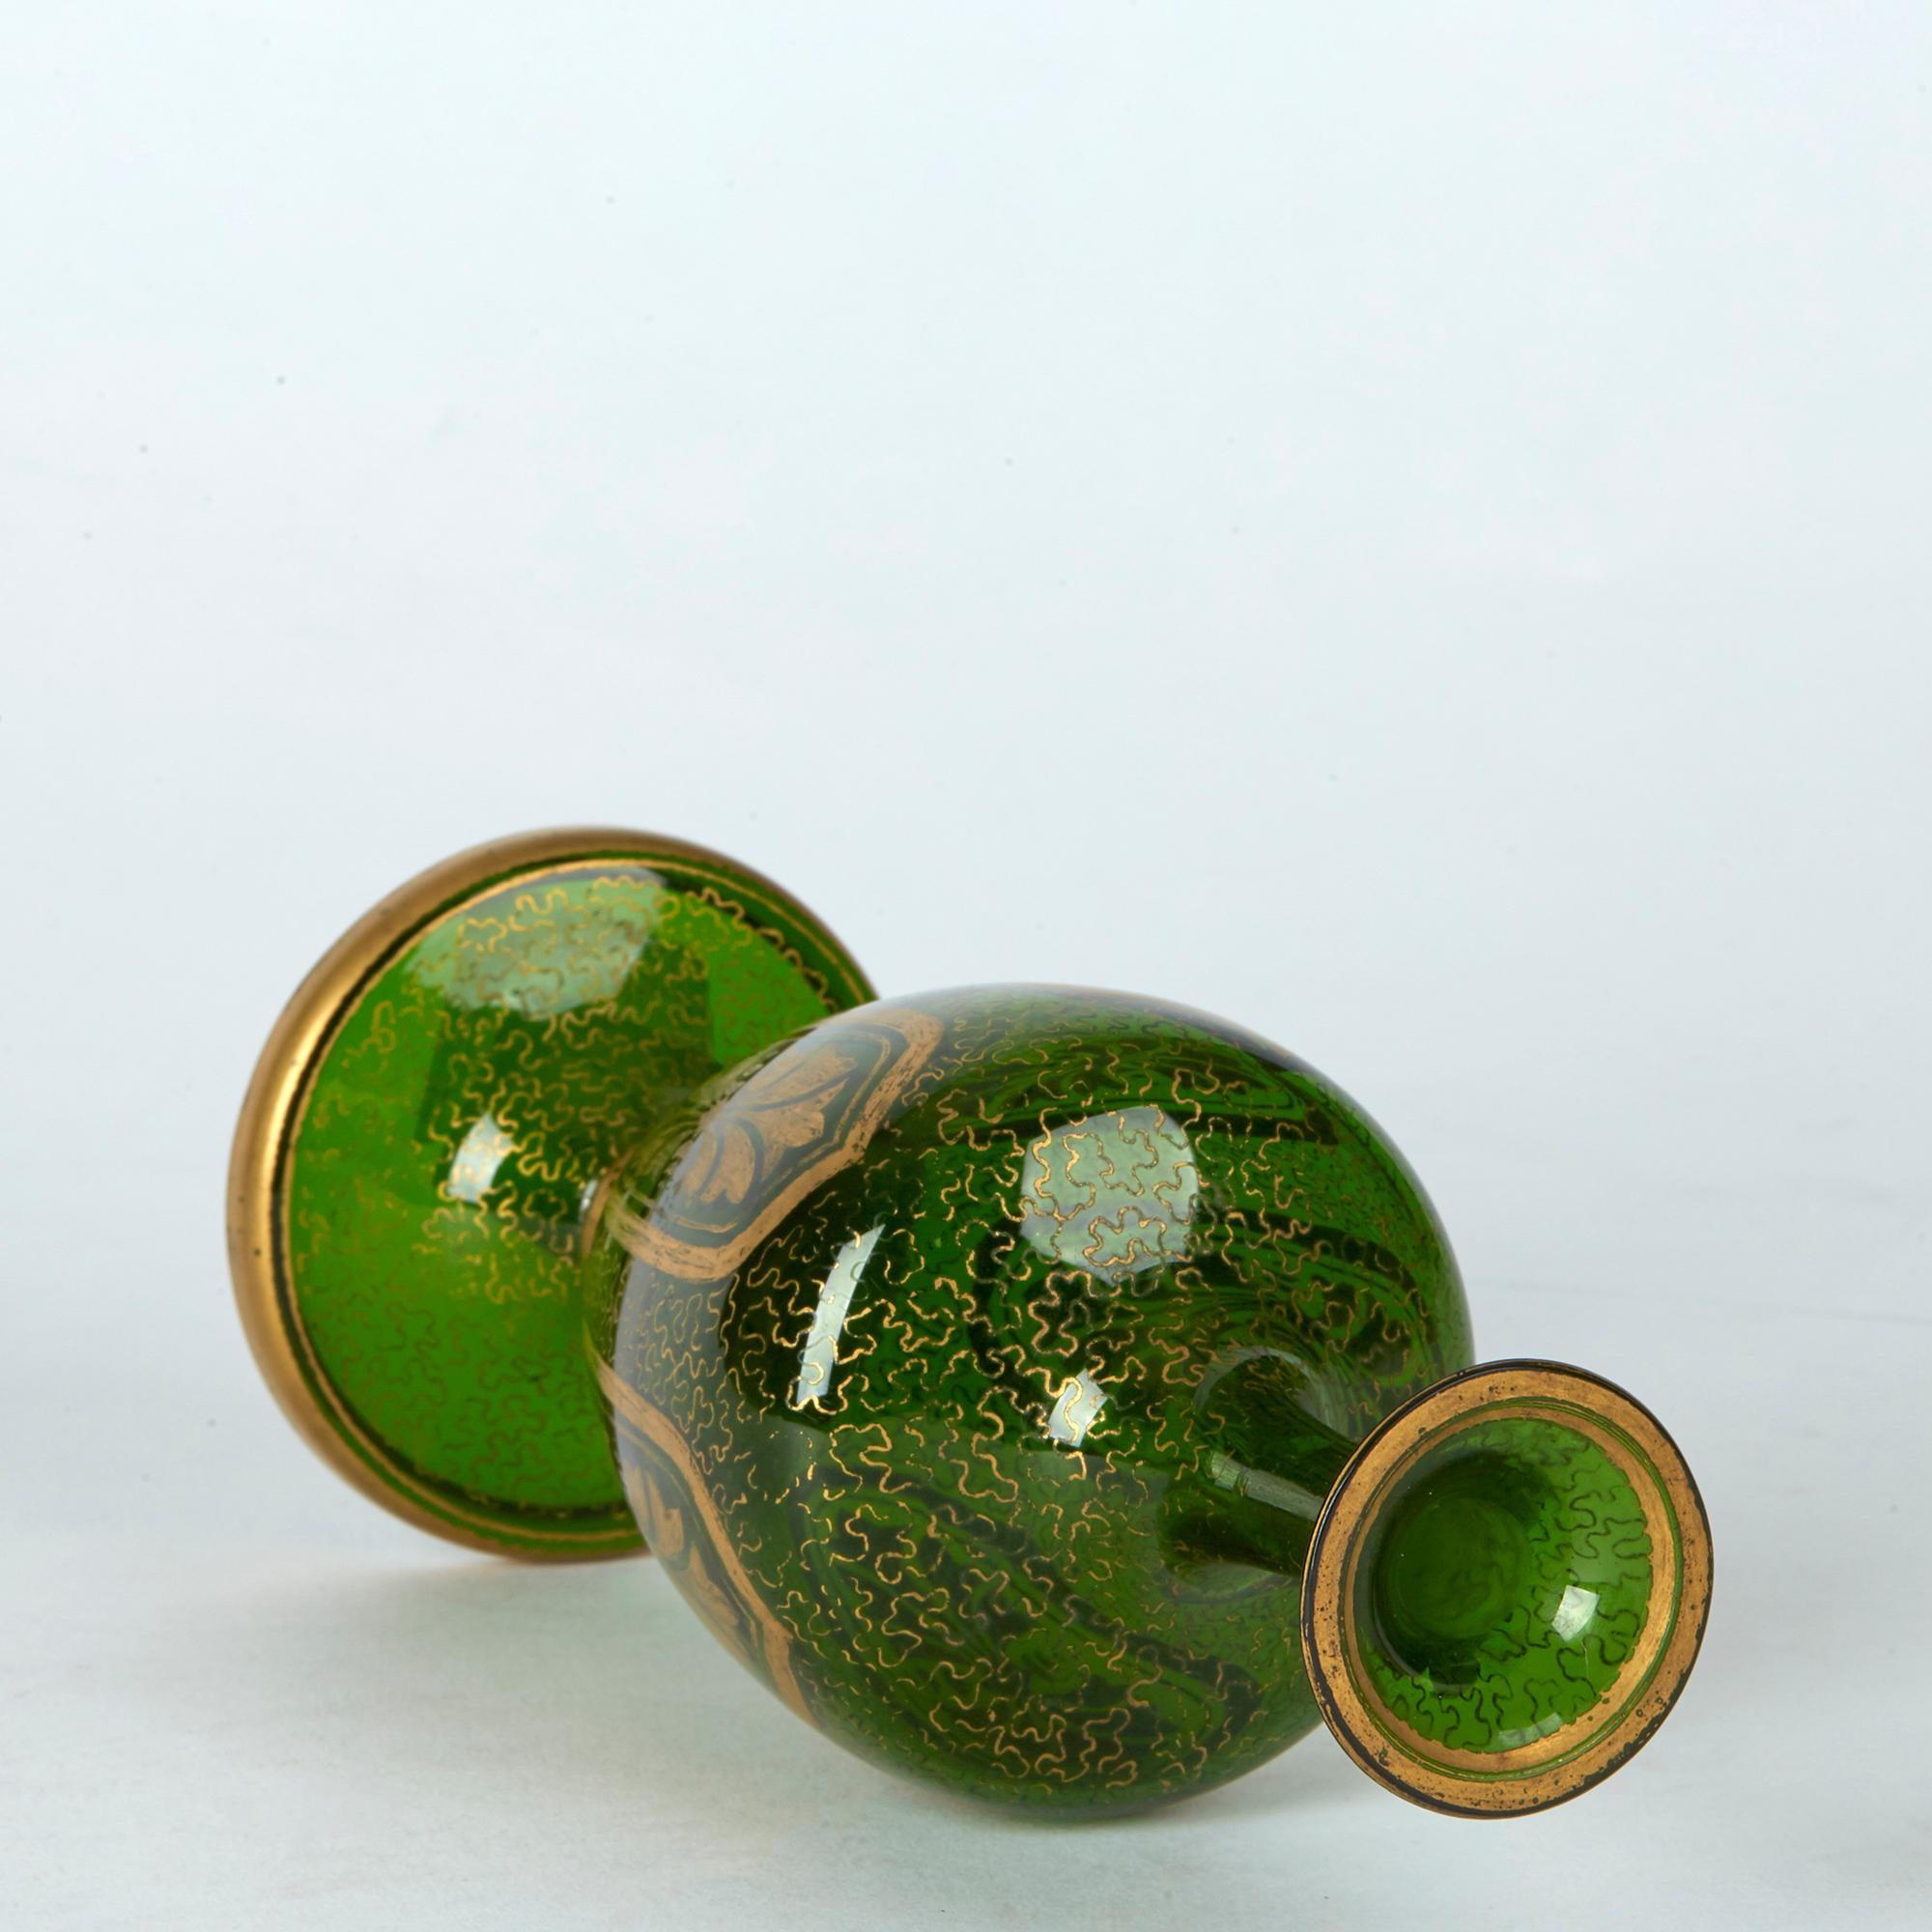 Other Pair of Antique Bohemian Gilded Green Glass Vases, 19th Century